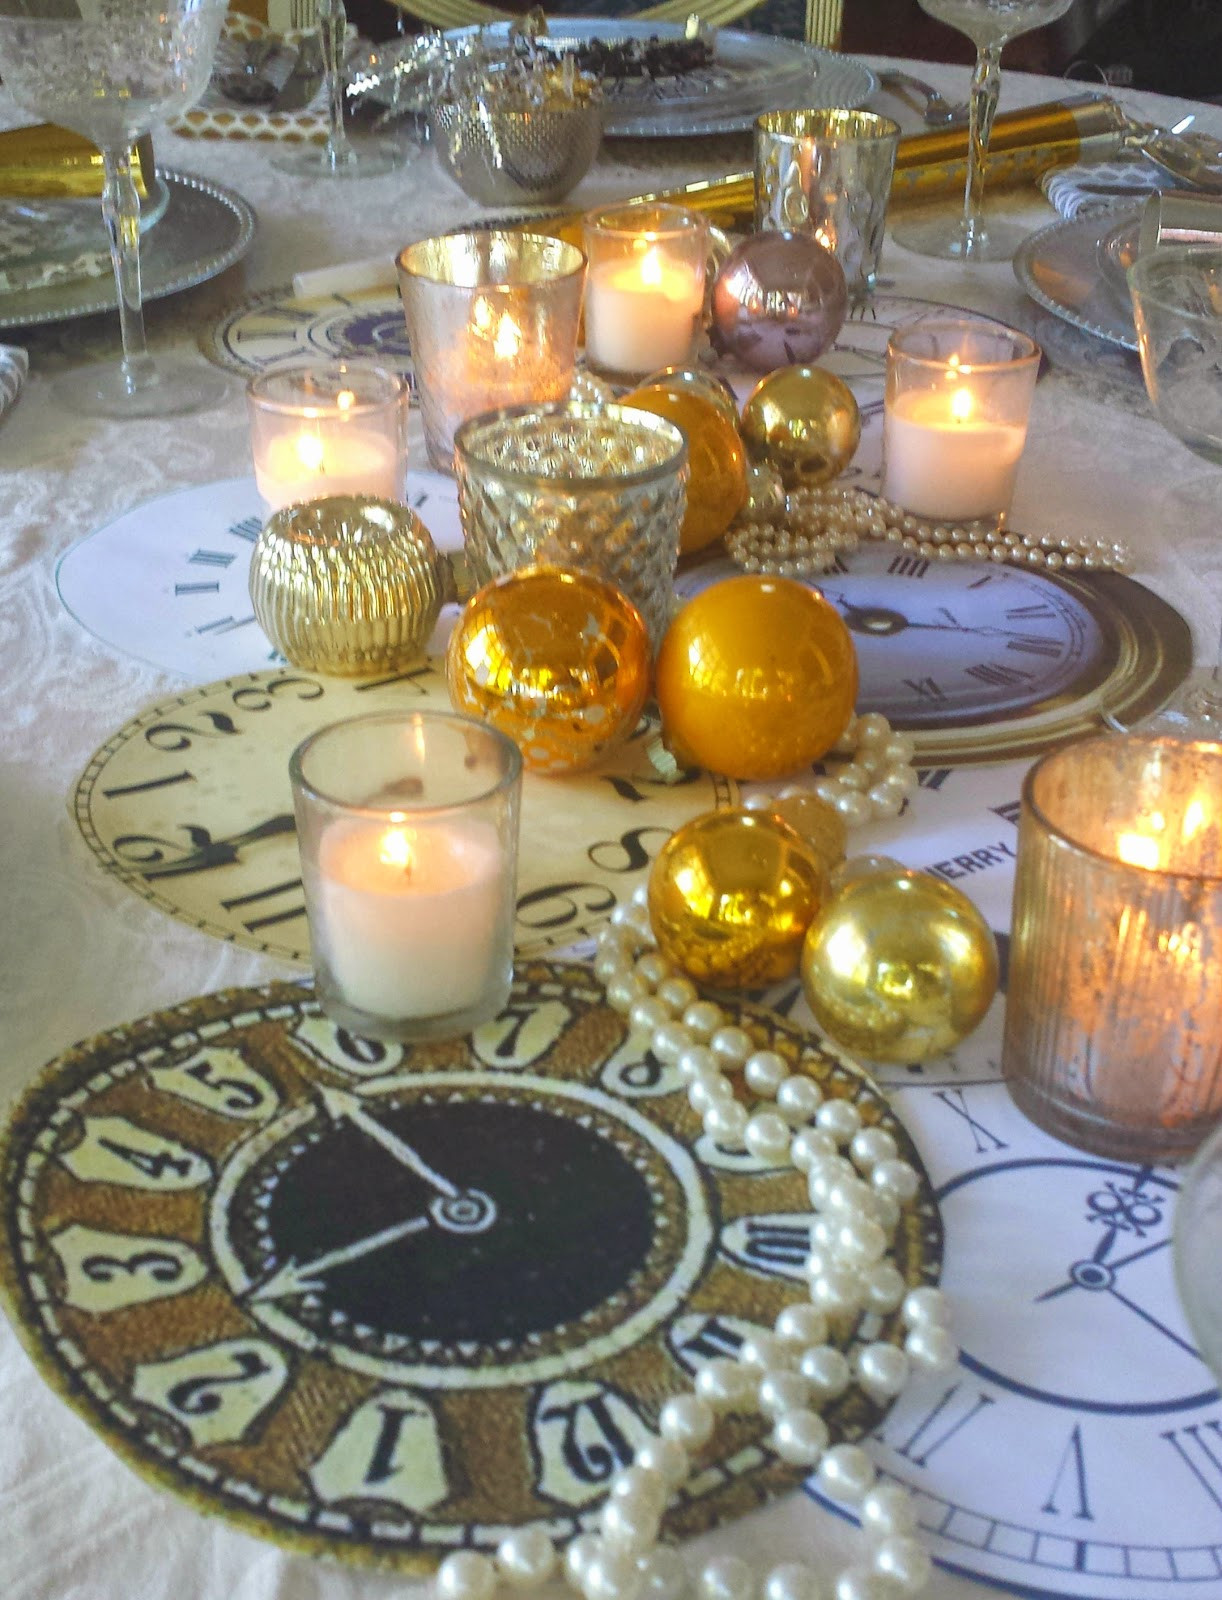 New Year Centerpiece Ideas
 ciao newport beach my new year s eve table